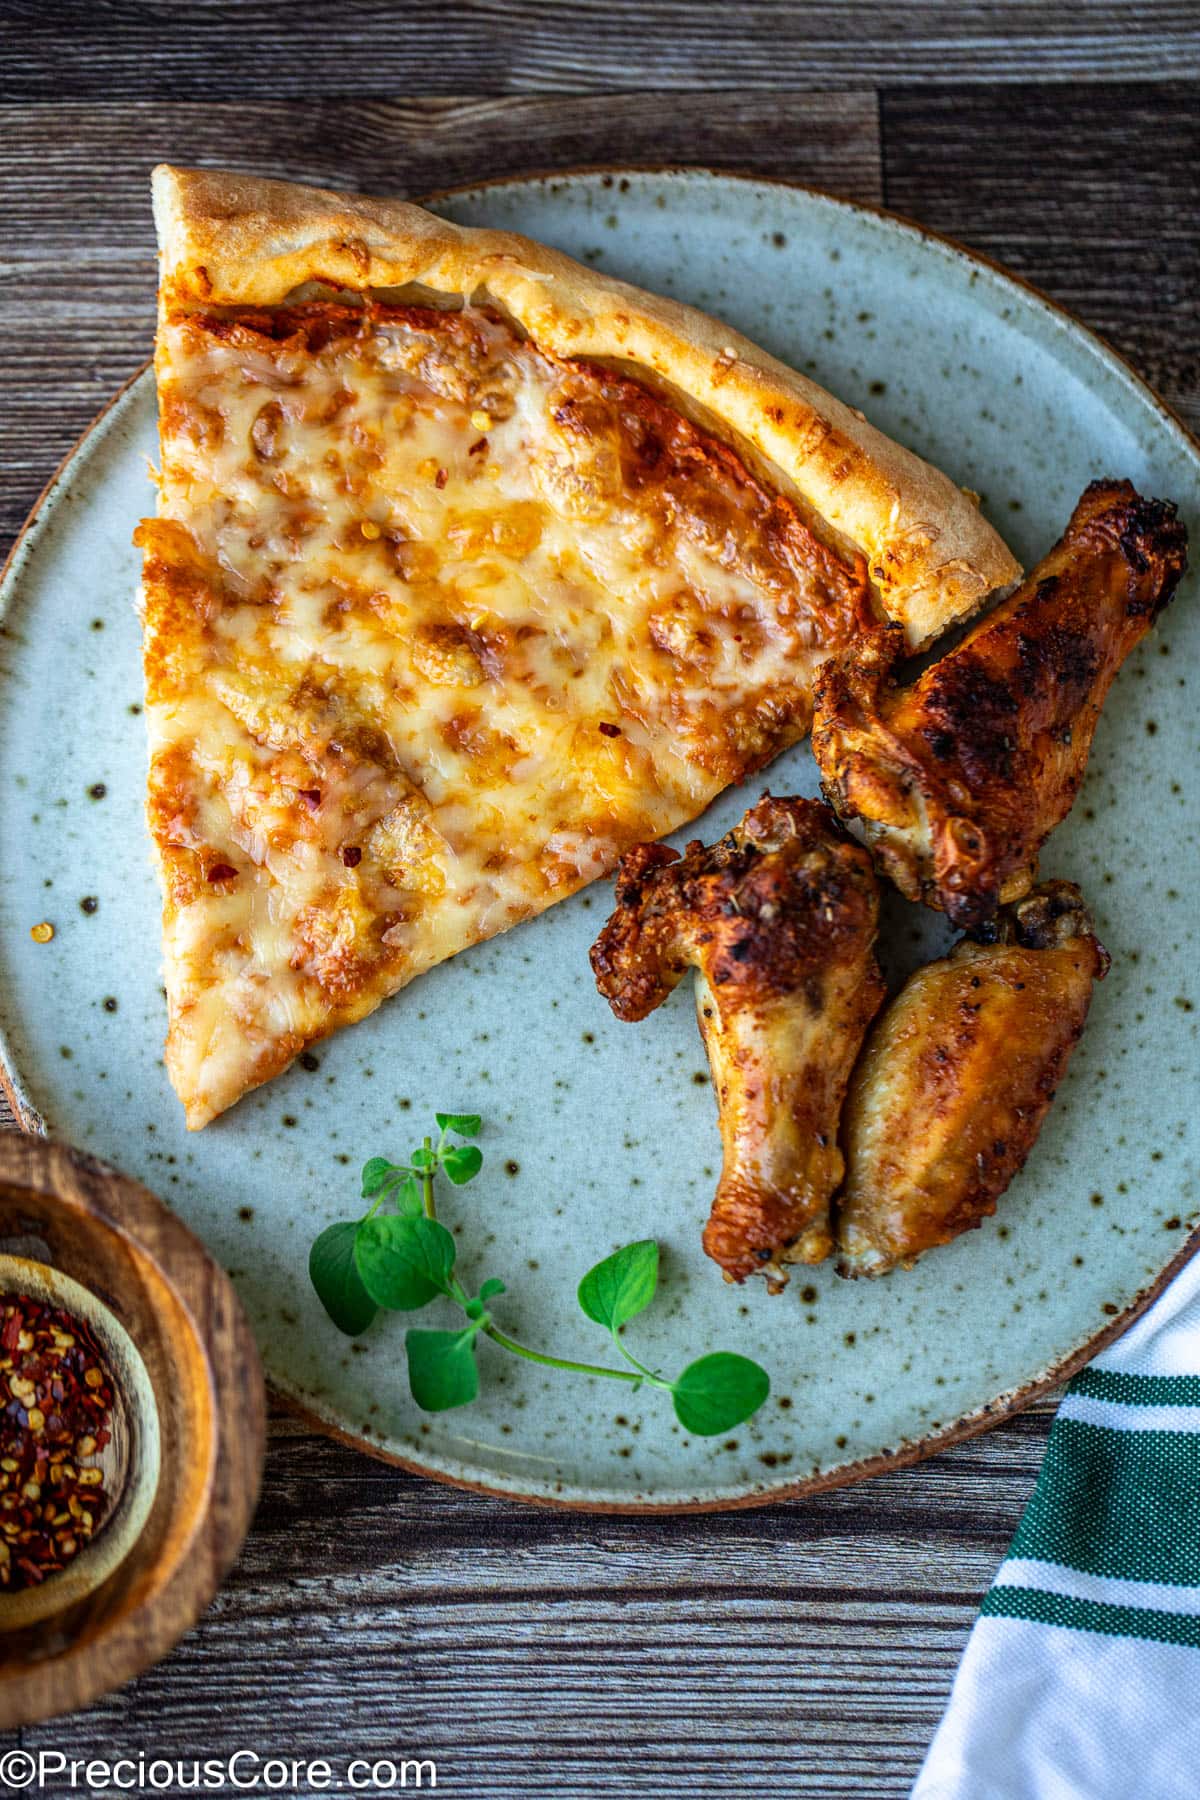 A slice of pizza on a plate with some chicken wings on the side.